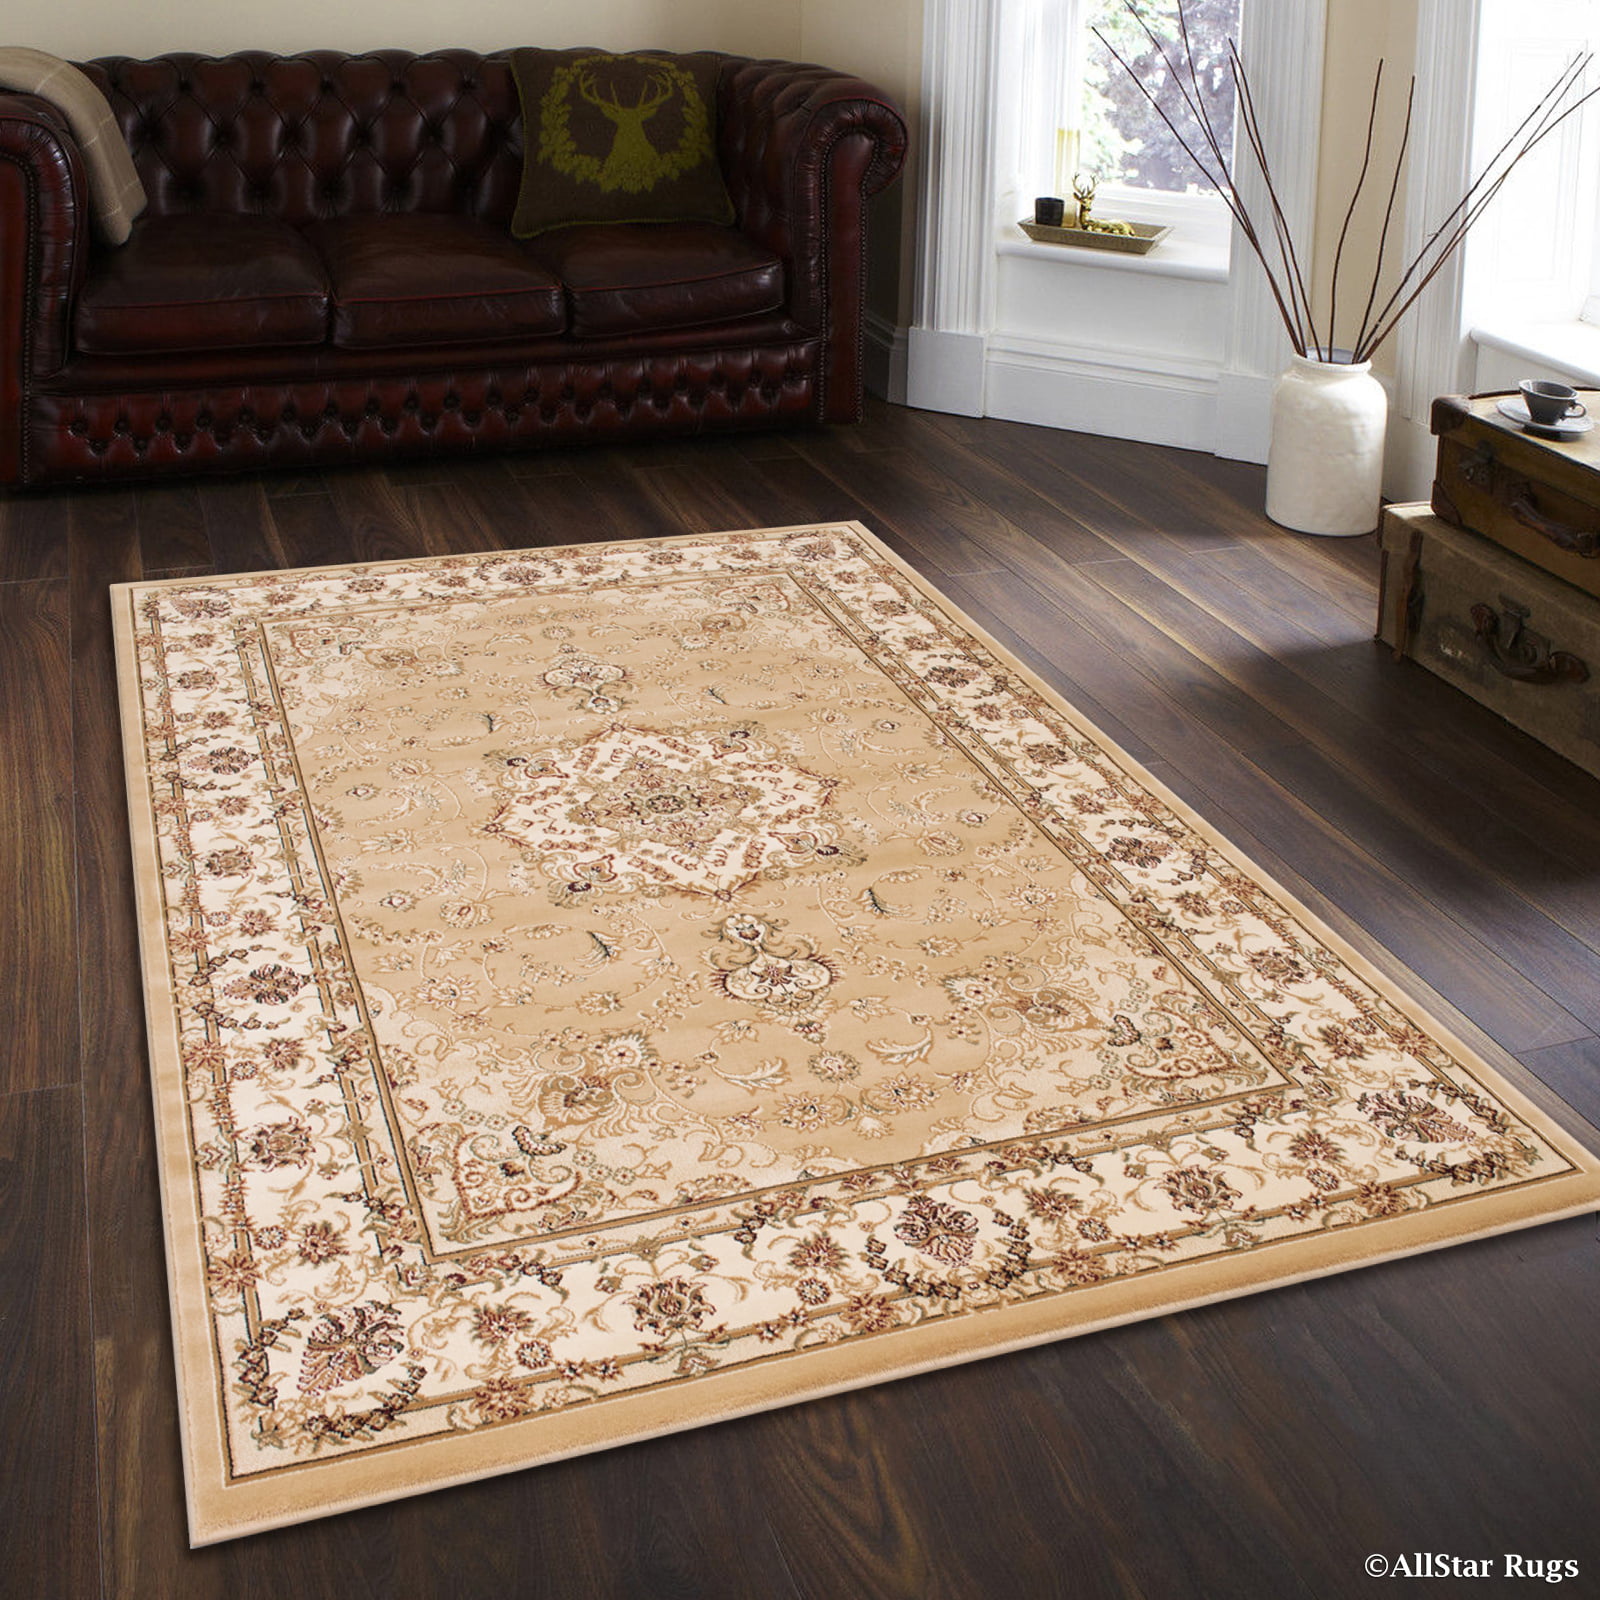 New High End Rugs with Simple Decor